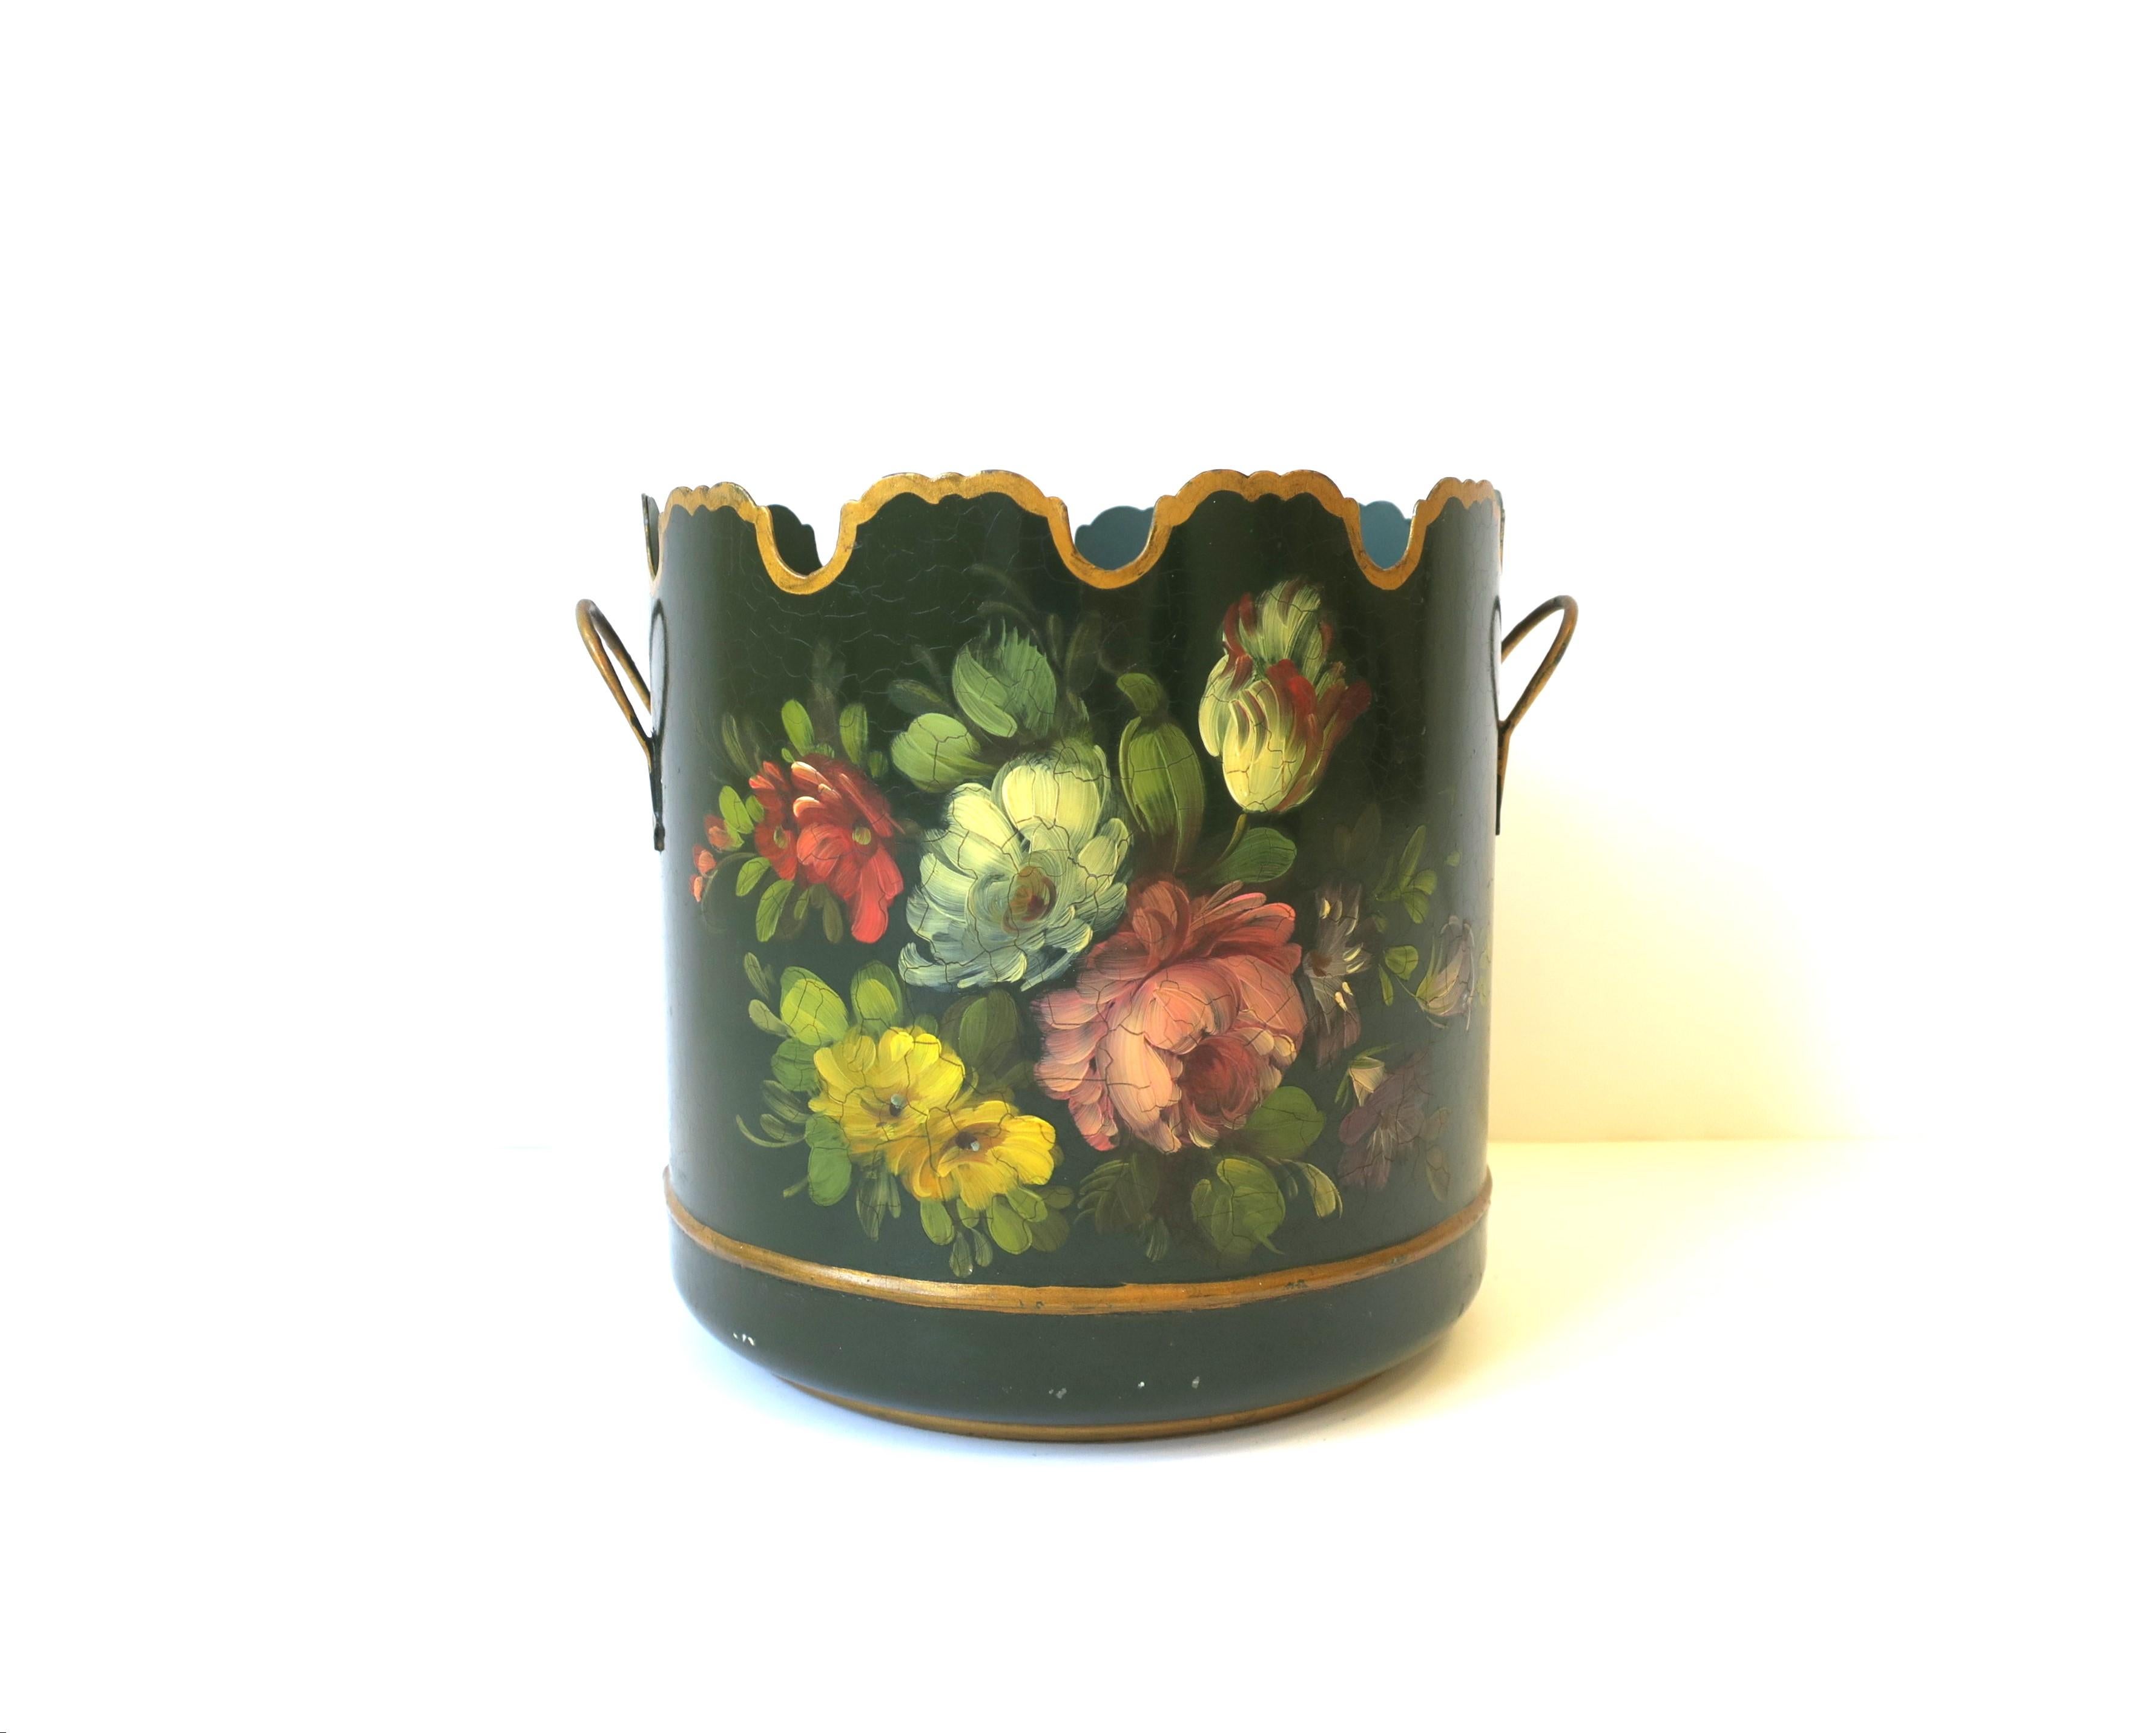 Metal French Tôle Green & Gold Jardinière Cachepot with Scalloped Edge, 20th c France For Sale